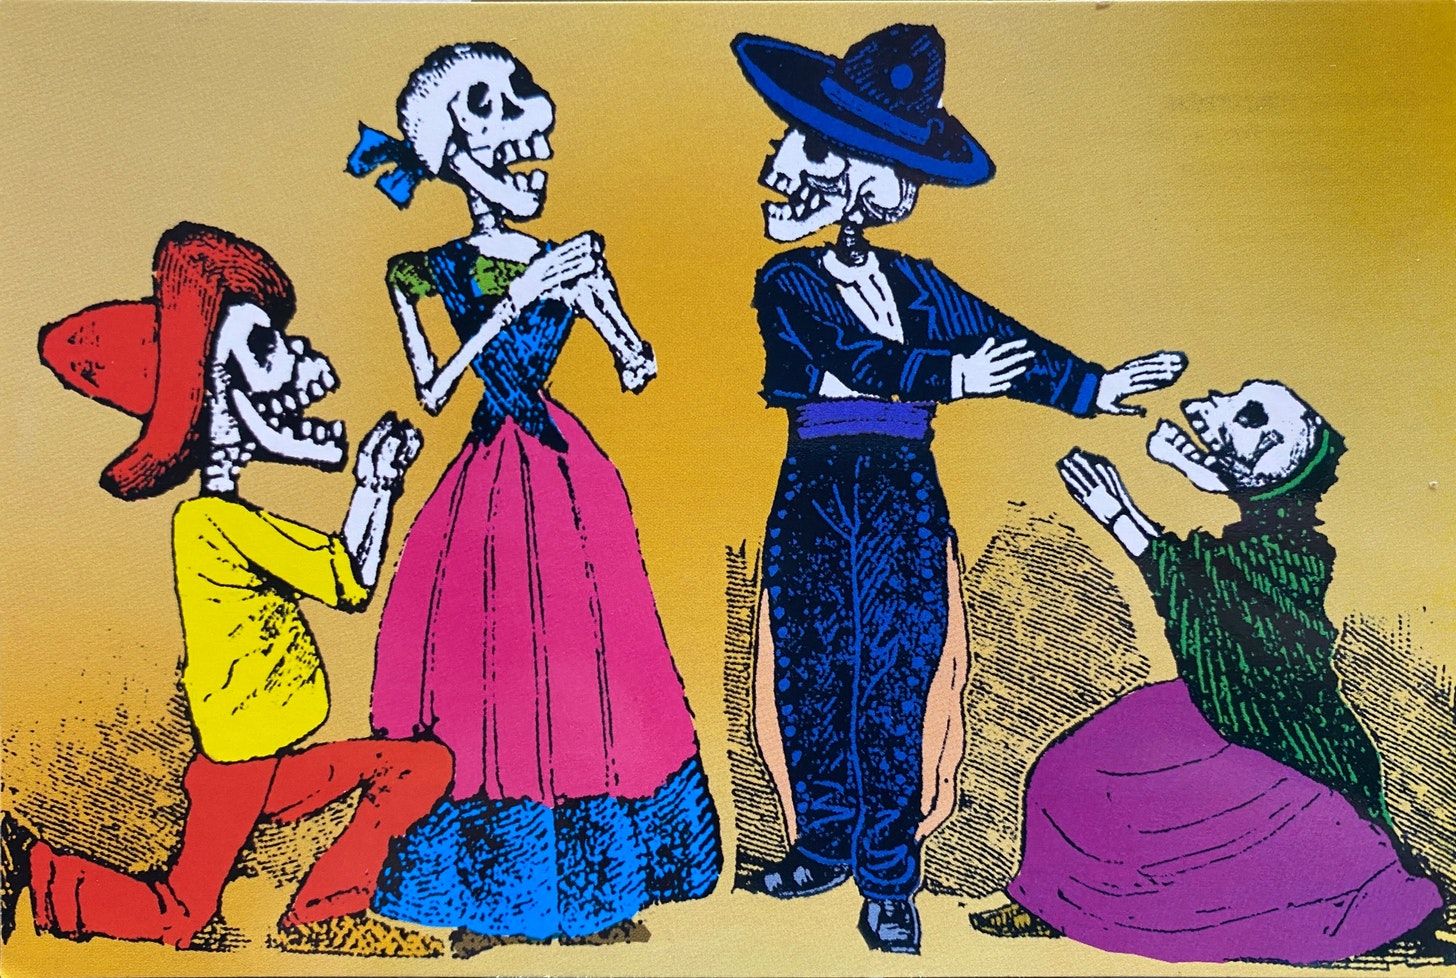 From left to right: A skeleton with pants and a sombrero, kneeling on one knee, with their hands together in a begging fashion. It is facing to the right, next to a standing skeleton wearing a lush mexican dress. It has their hands together, covering where the heart was once before. A skeleton dressed like a mariachi is facing the previous one, with their hands facing the right, pacifying the las skeleton. This one wears a skirt and a rebozo, looking supplicant to the previous skeleton.